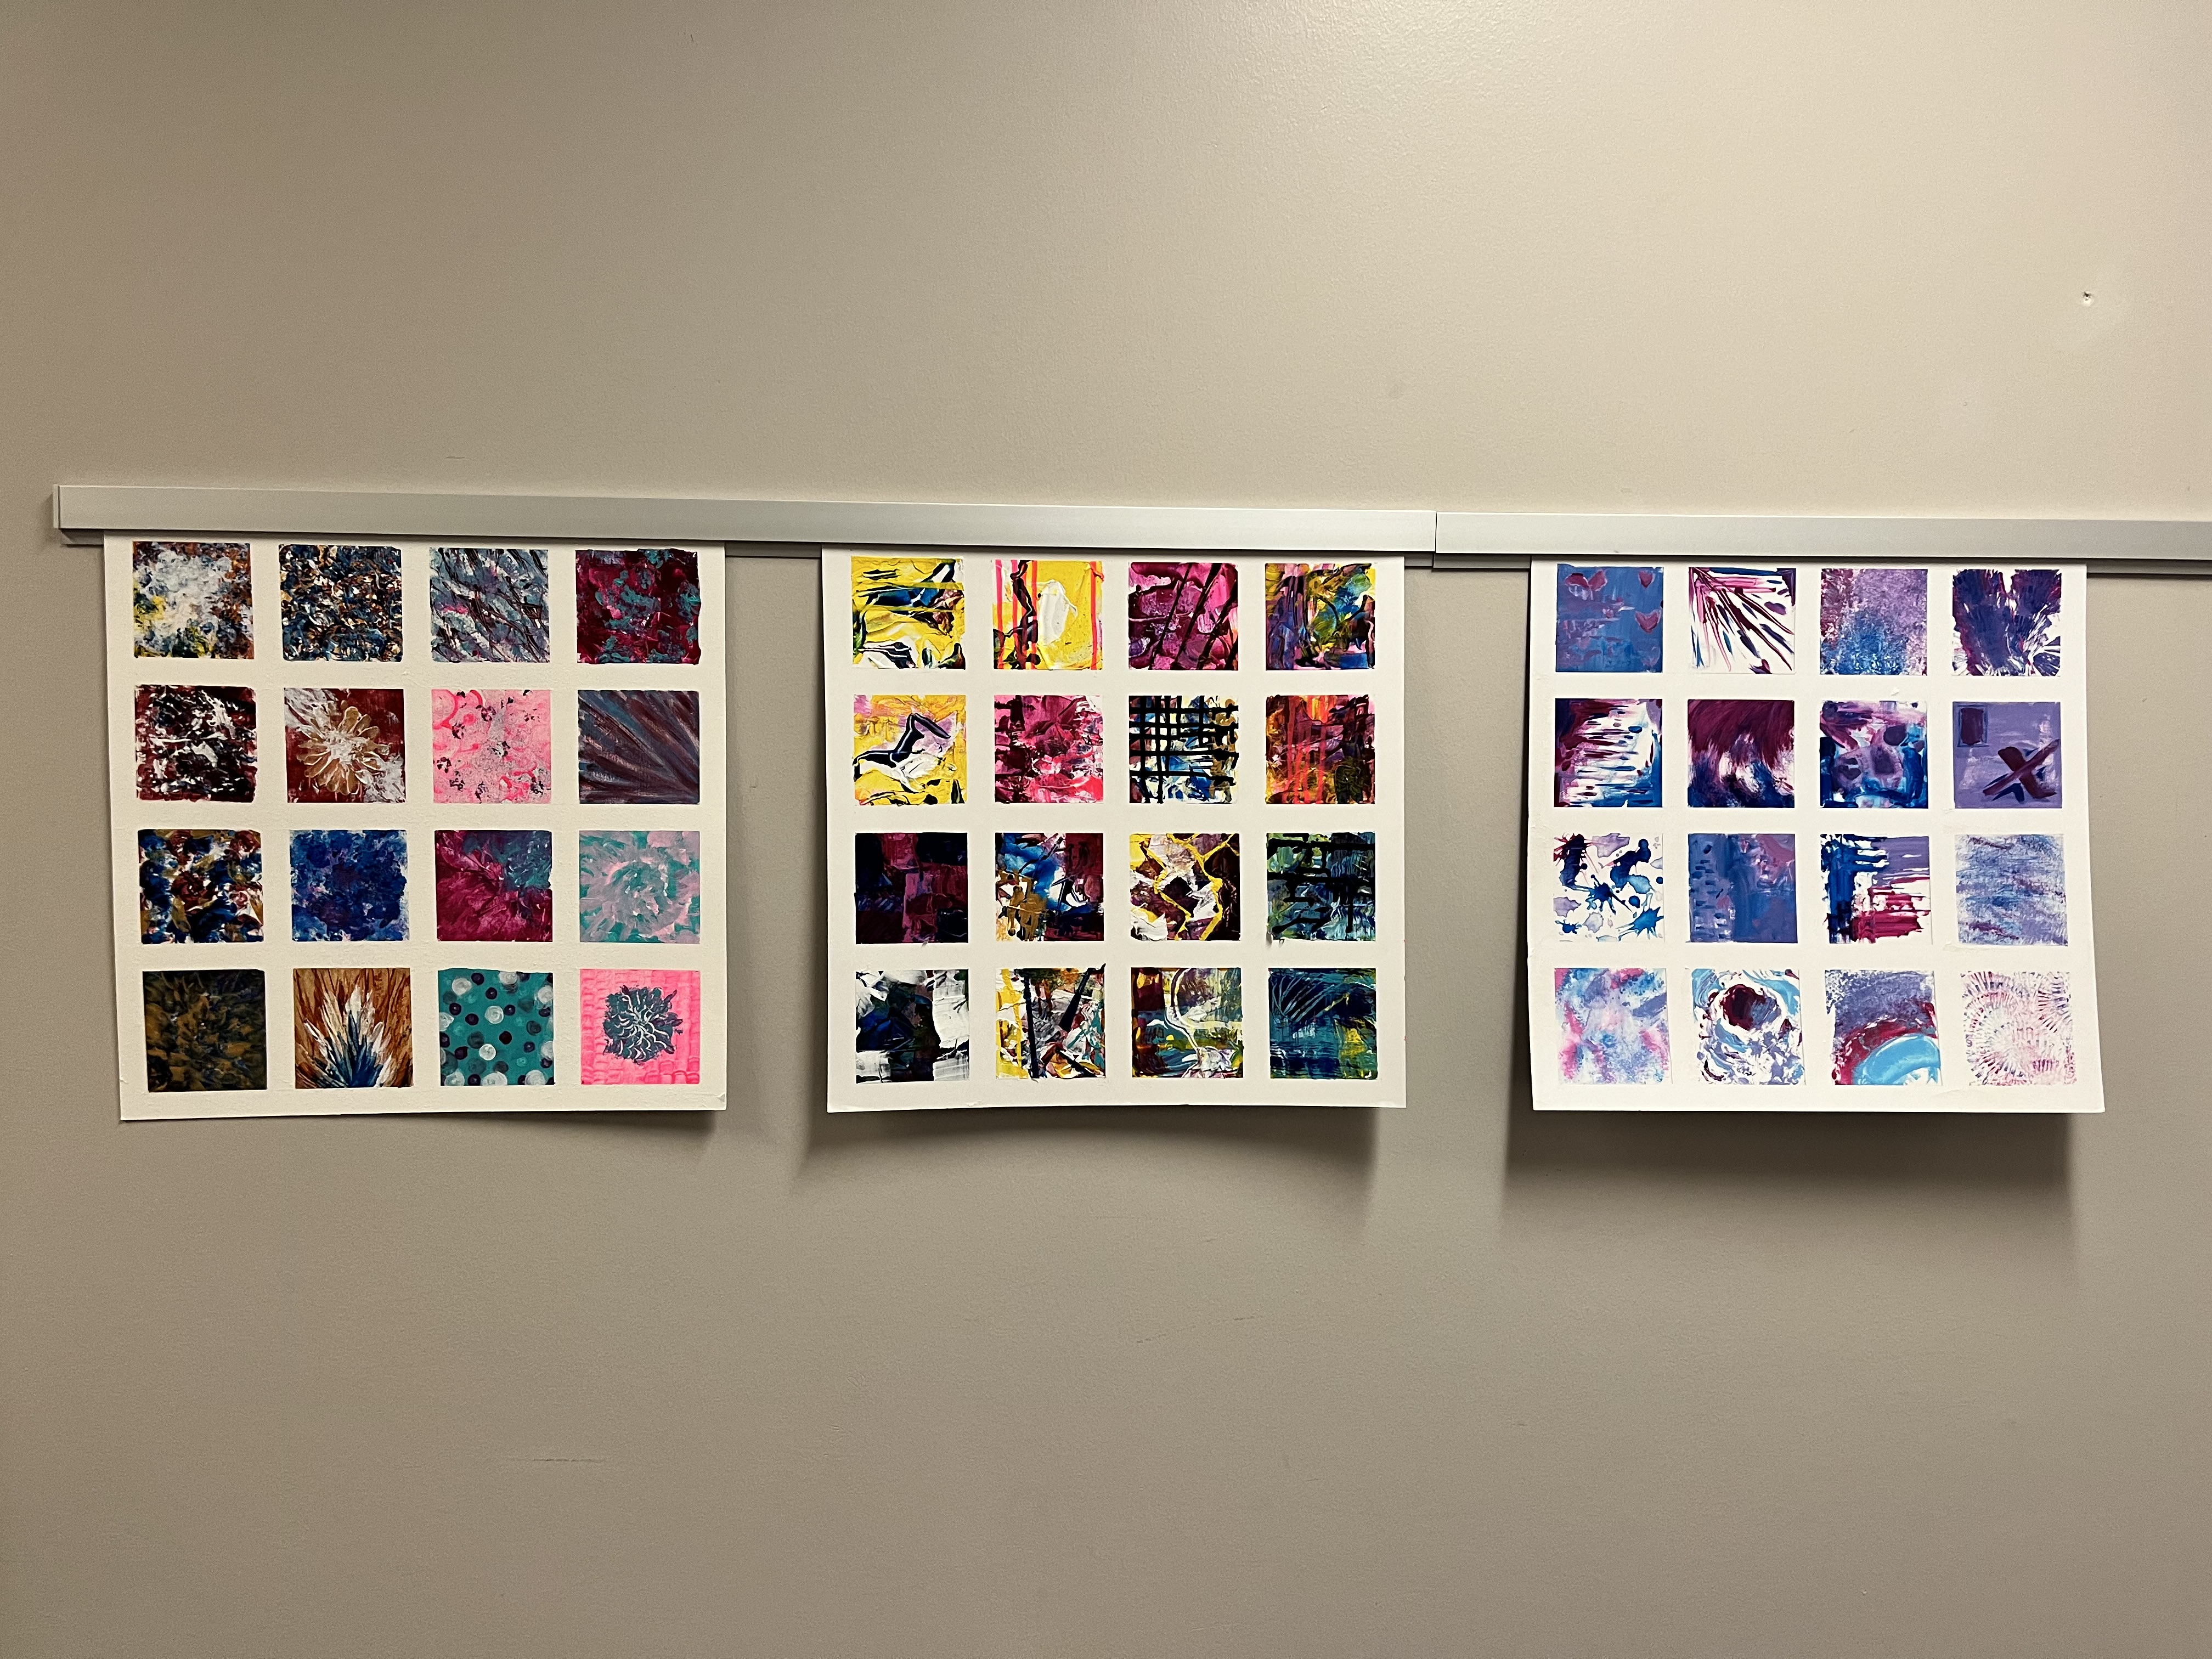 Student projects on display in the Fine Arts Center hallway